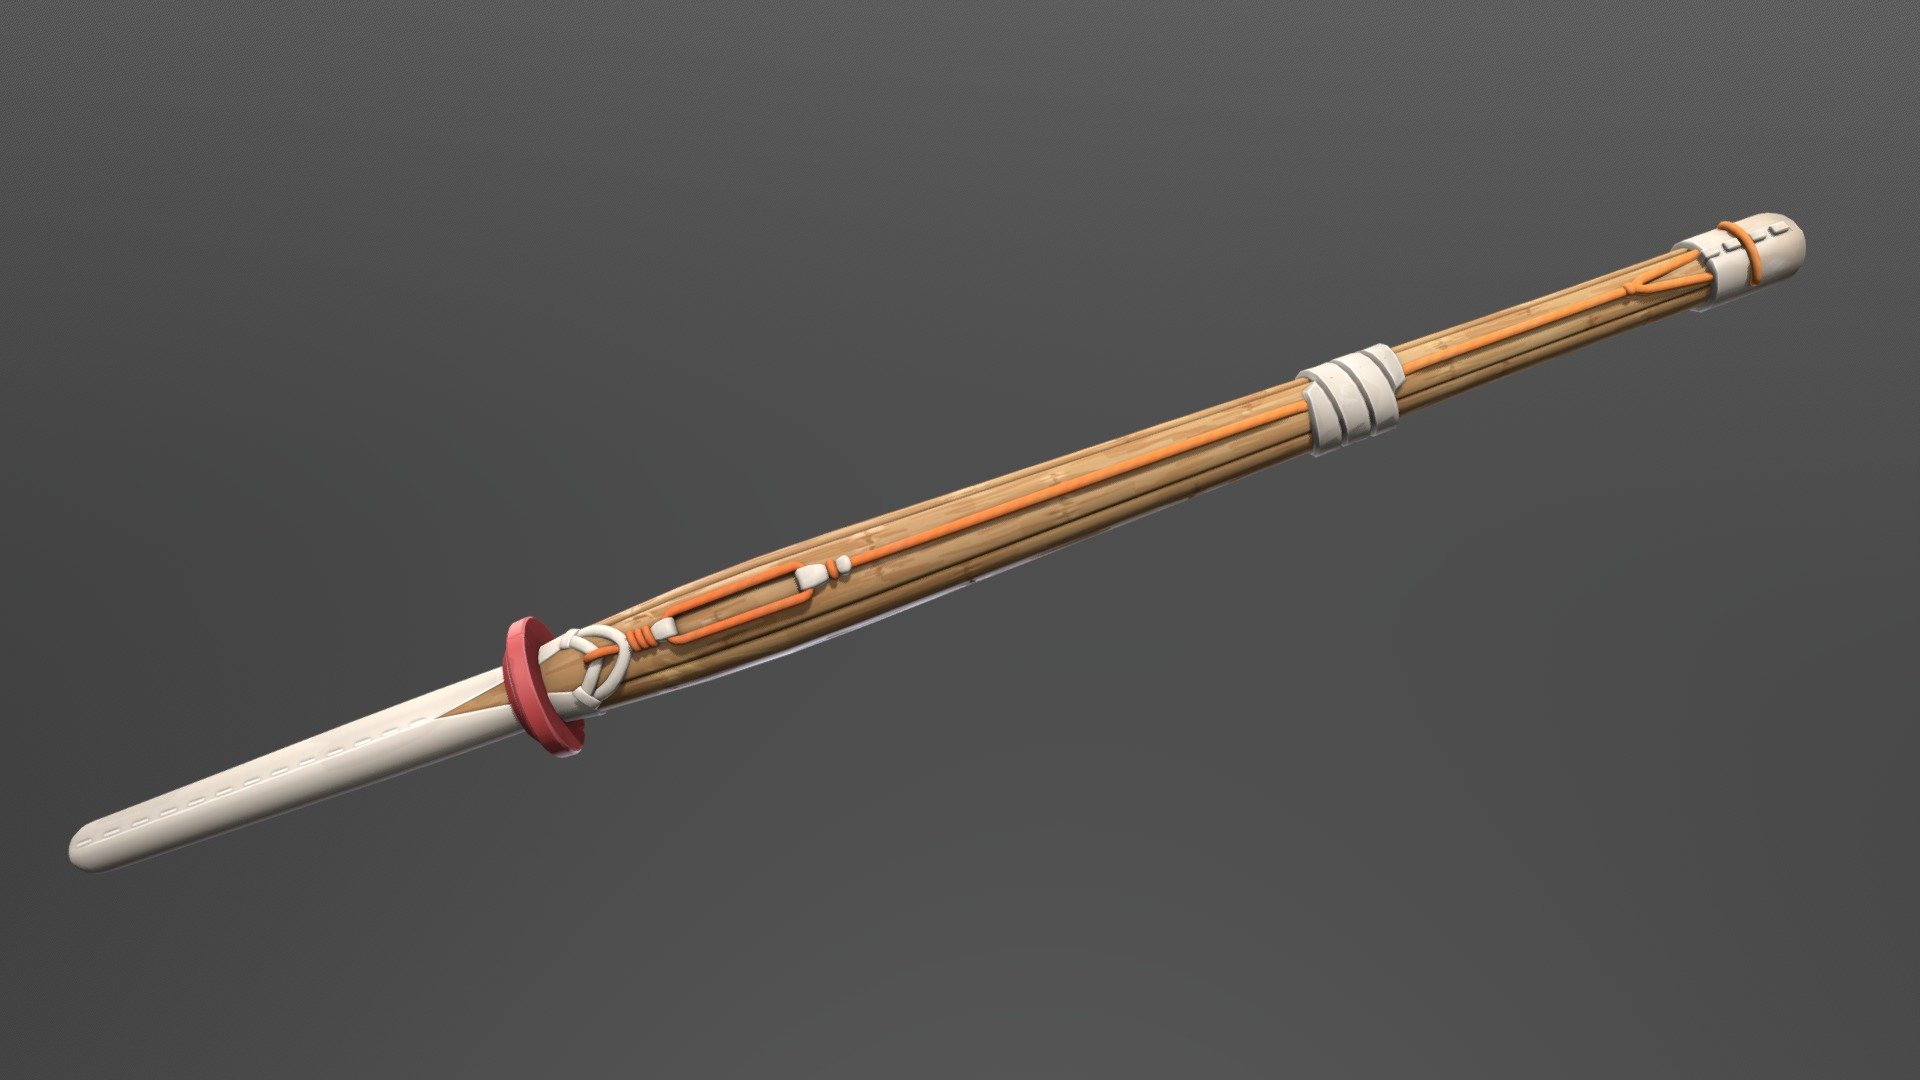 Team Fortress 2 custom weapon model of a bamboo sword for Demoman

View it on the Steam workshop at https://steamcommunity.com/sharedfiles/filedetails/?id=1425747306 - TF2 Kendo Shinai - 3D model by crazy-g 3d model